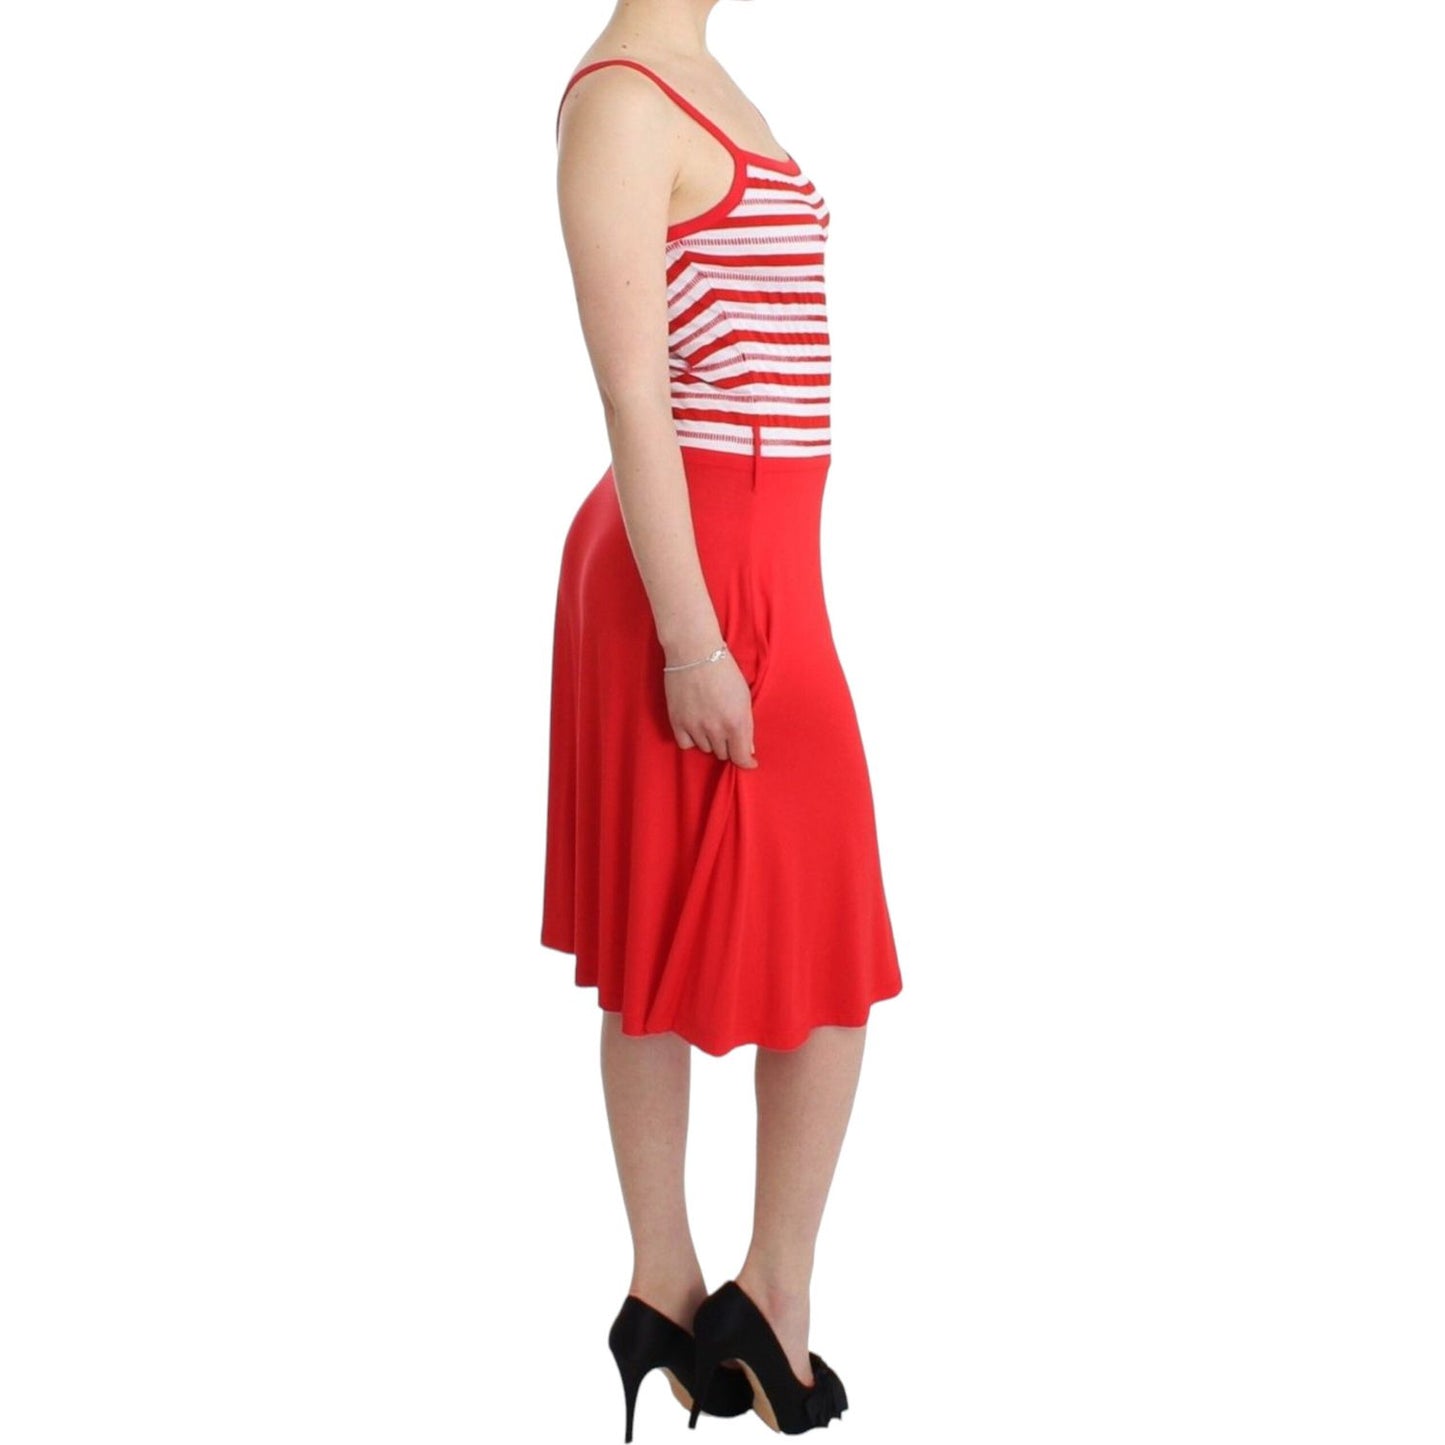 Roccobarocco Red striped jersey A-line dress red-striped-jersey-a-line-dress 2781-white-sheath-dress-31-scaled-191105ec-72c_3c3447b9-3db1-43d6-ab08-65d2aace8ea0.jpg